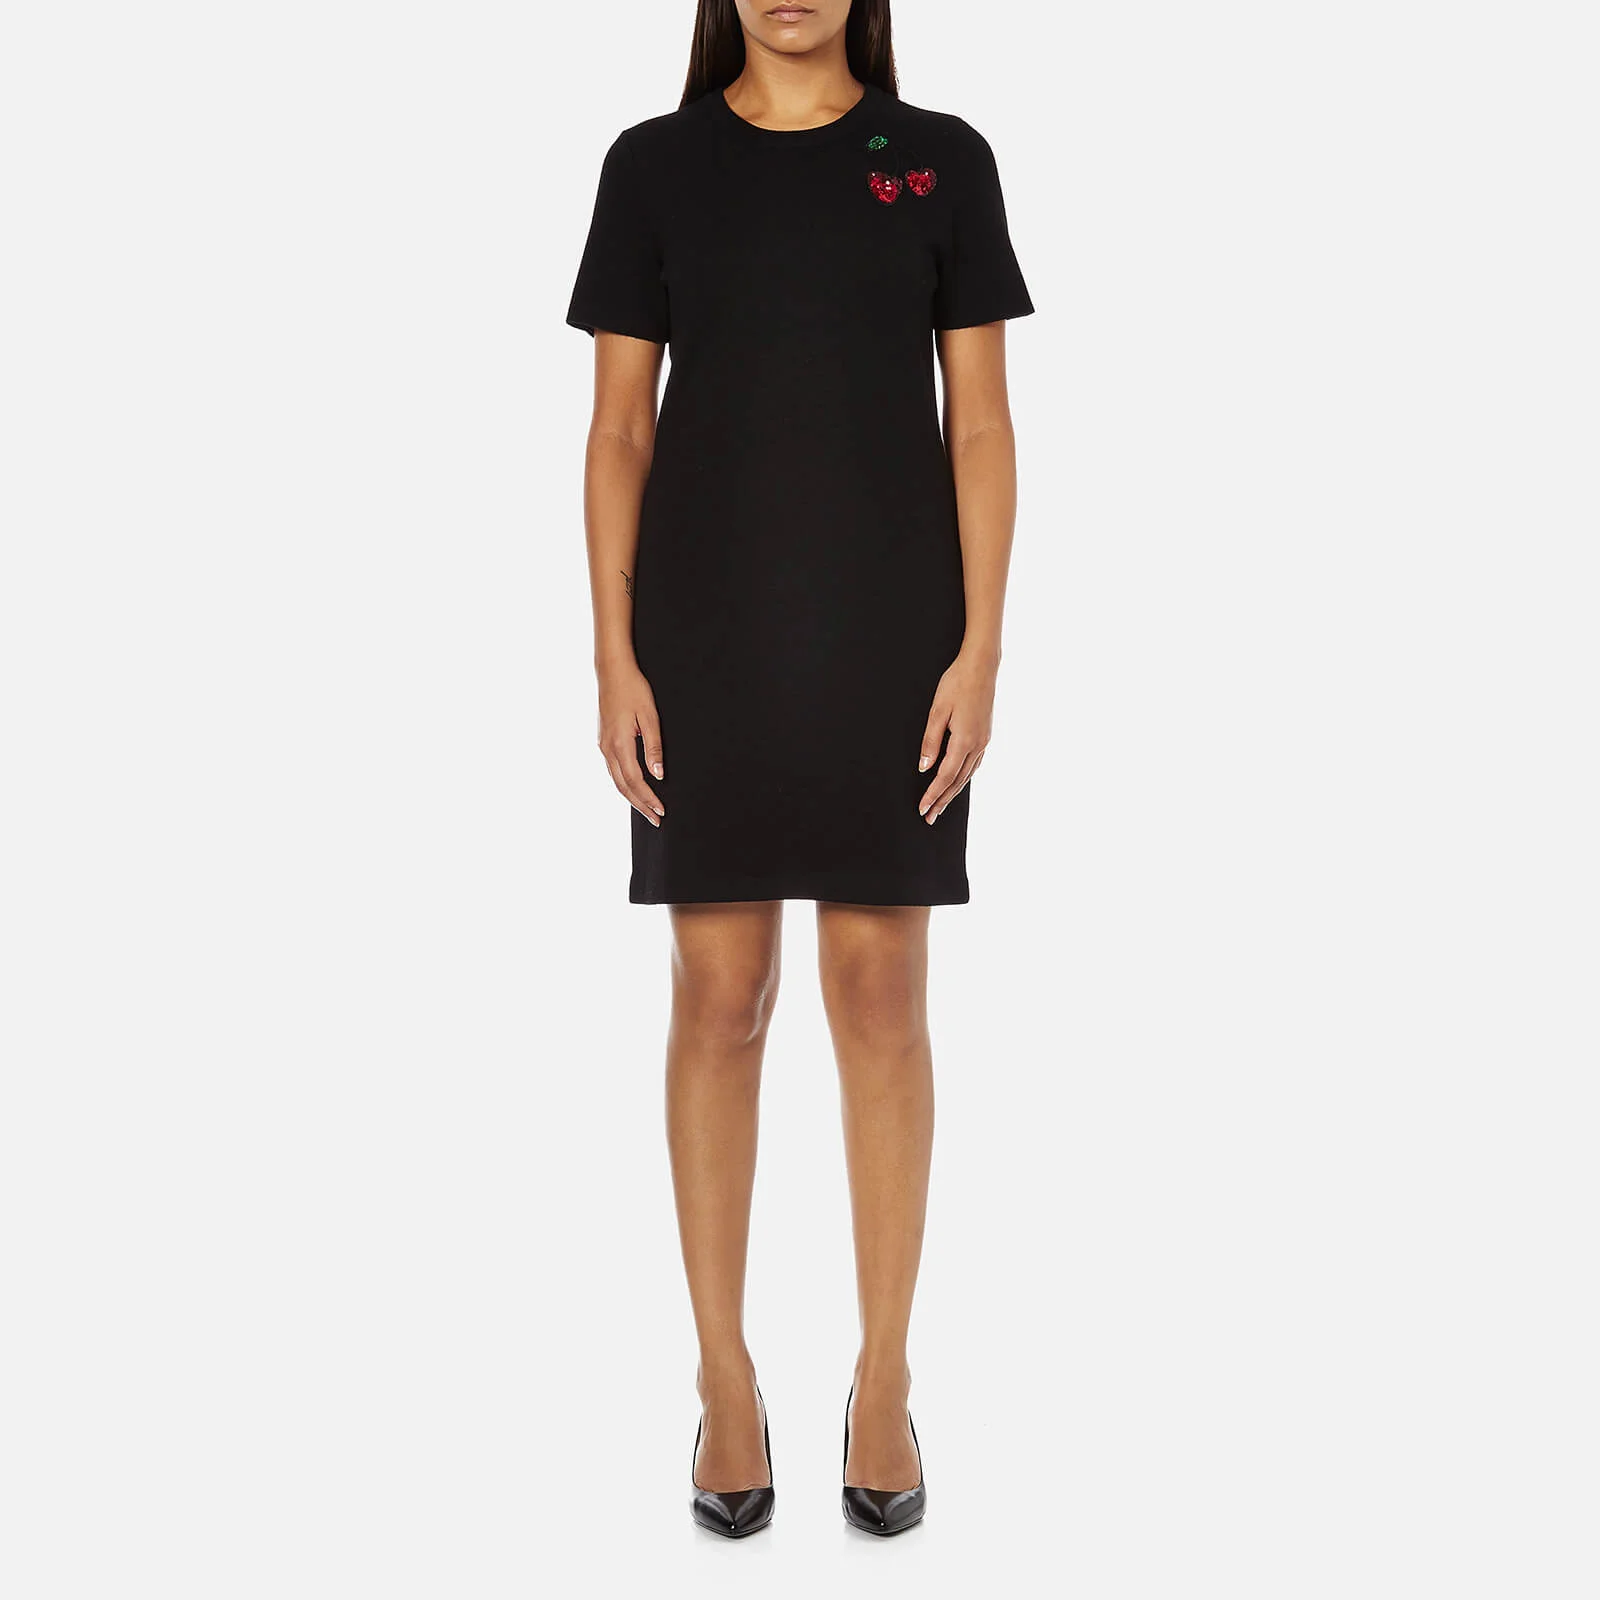 Marc by Marc Jacobs Women's Embroidered Fruits Sweatshirt Dress - Black Image 1